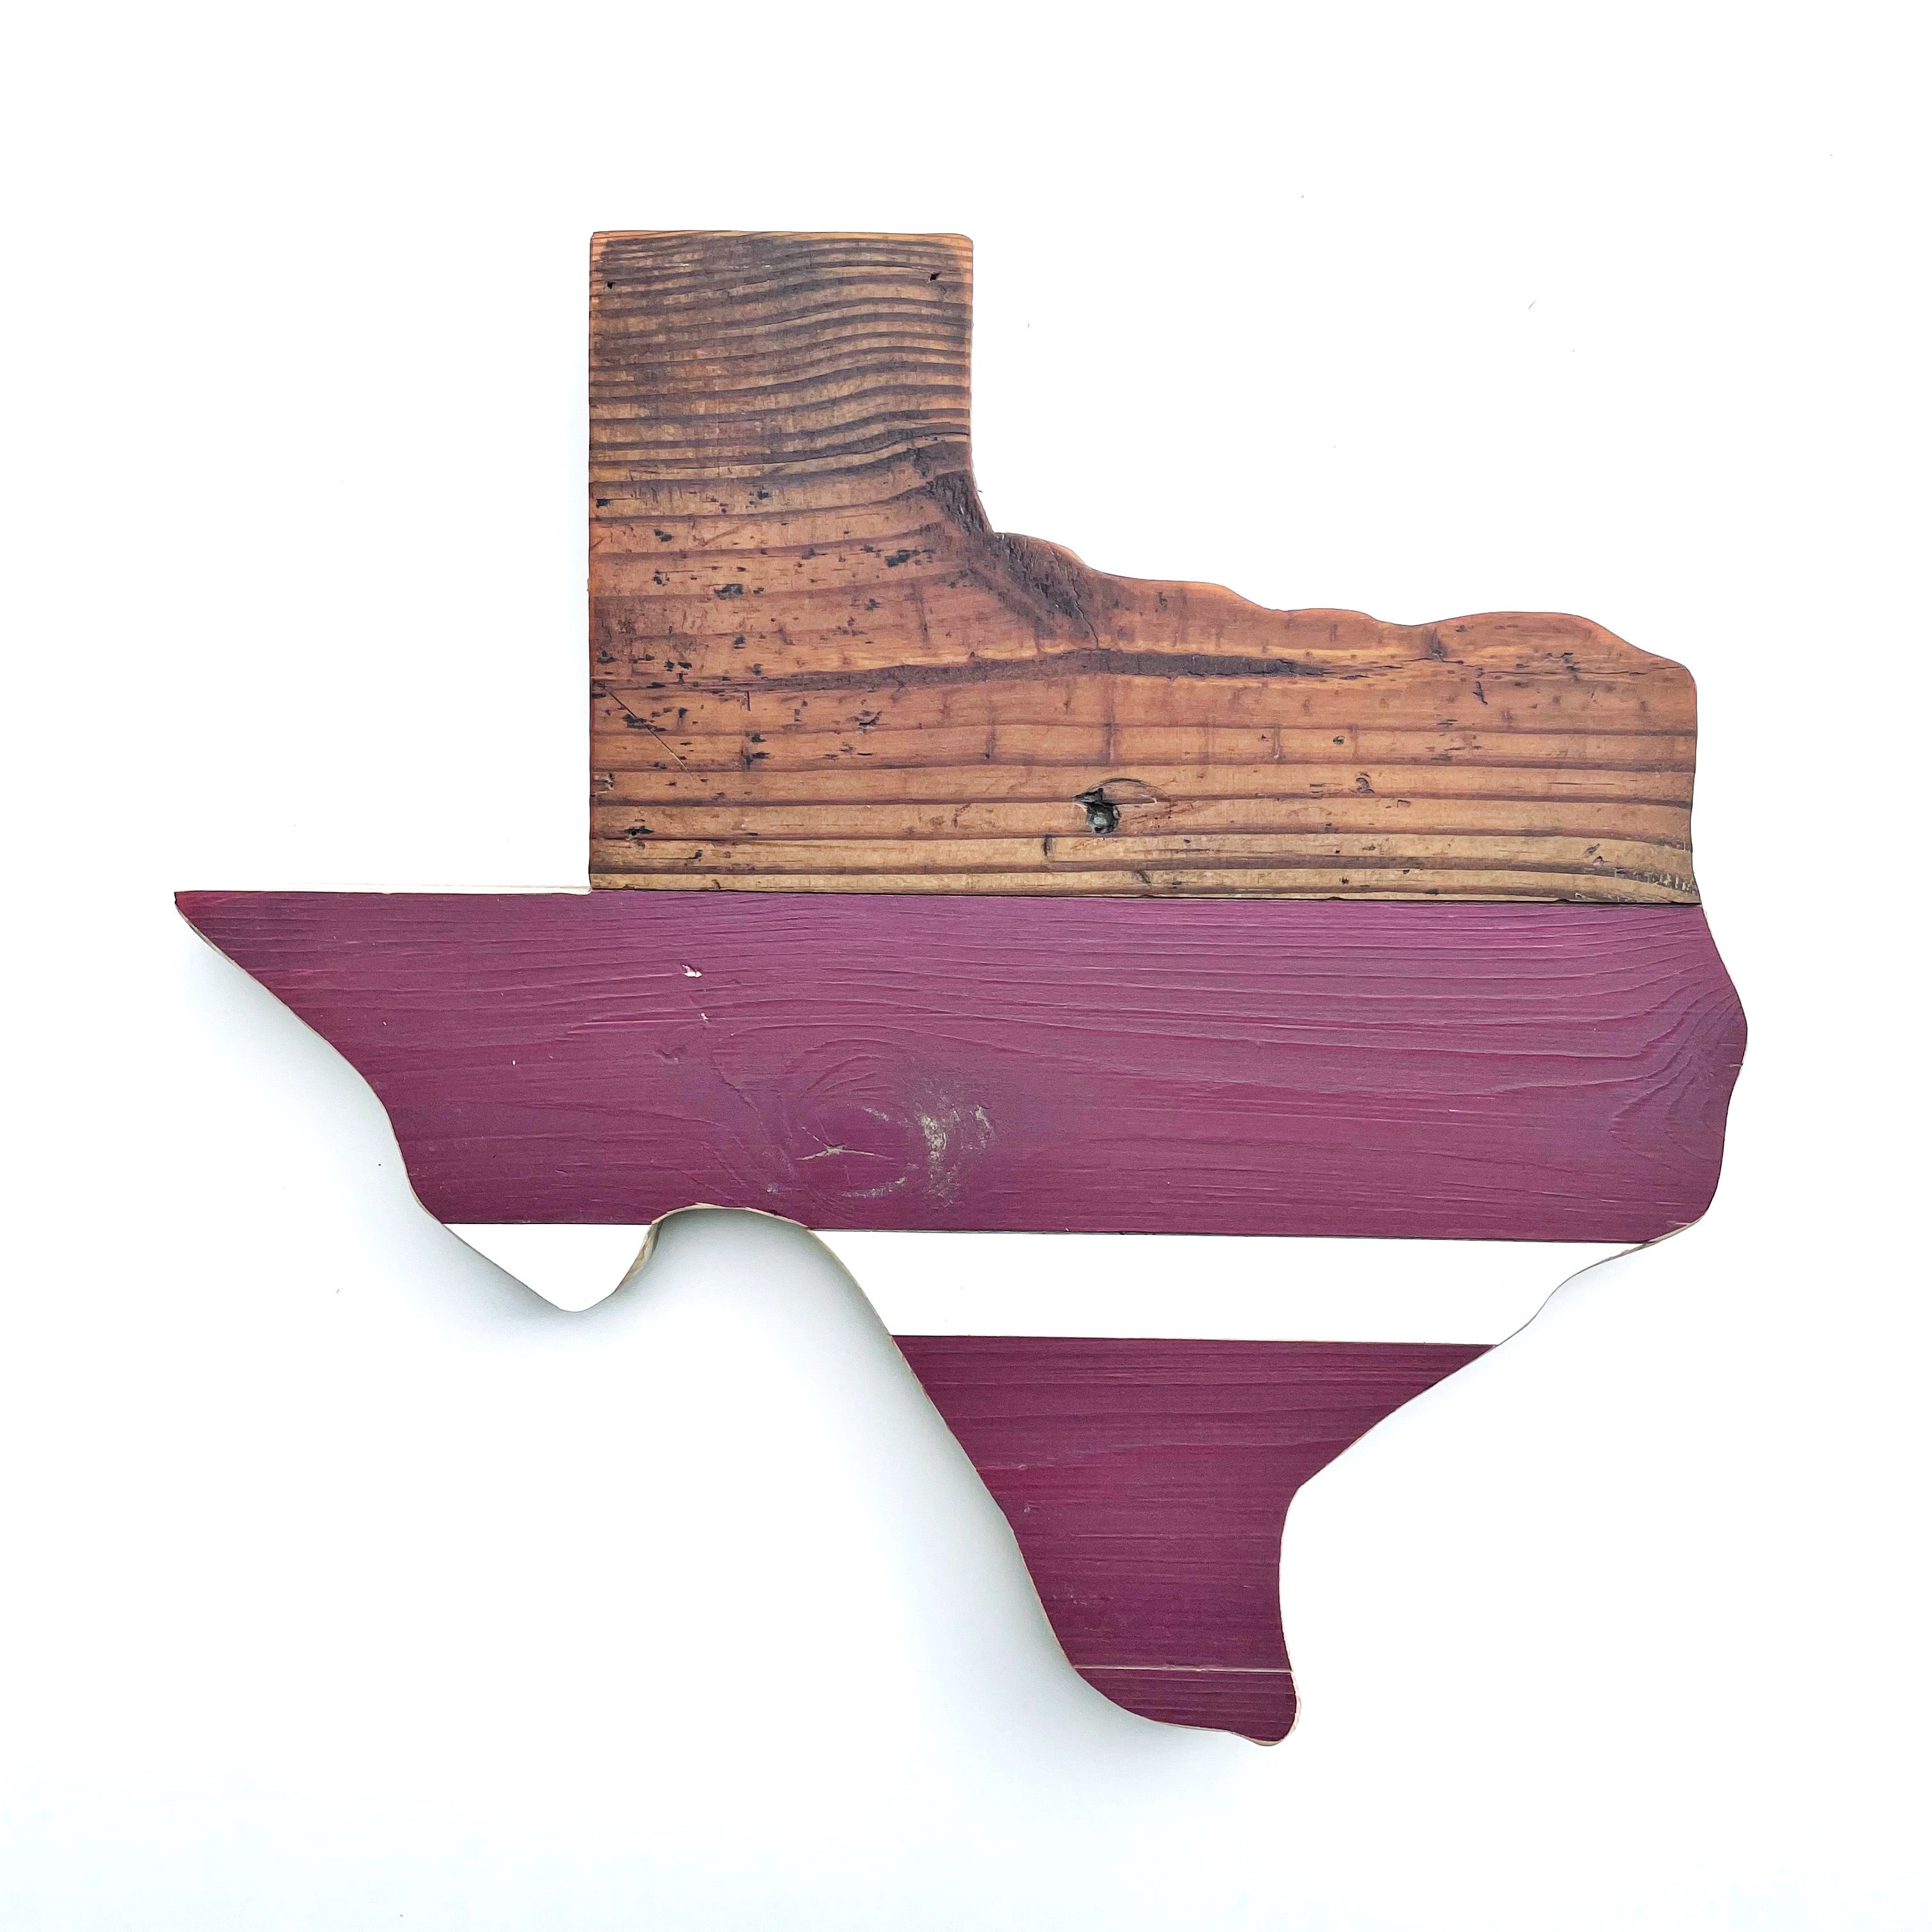 Team Spirit Texas Wall Hanging 15 in | One of a Kind